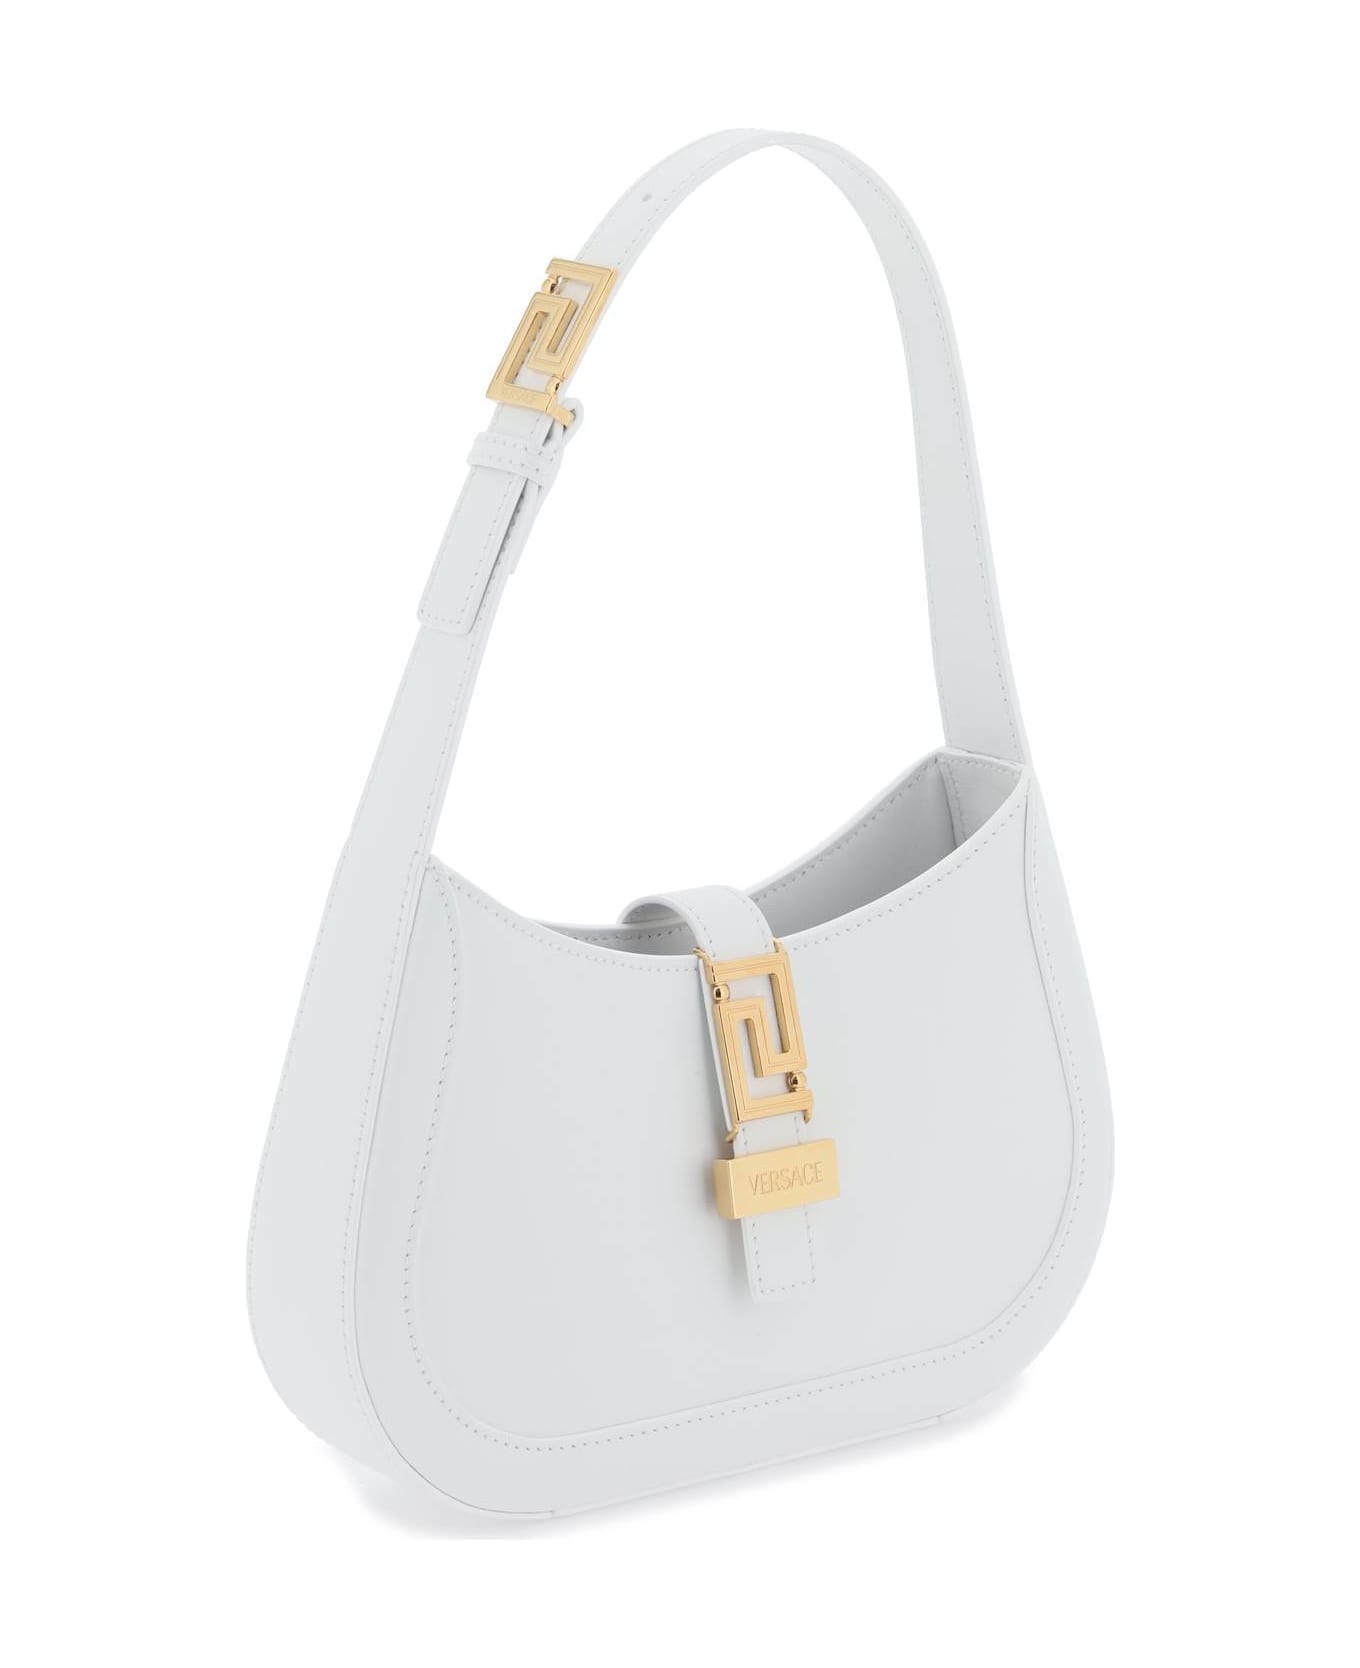 Versace White Leather Bag - White トートバッグ